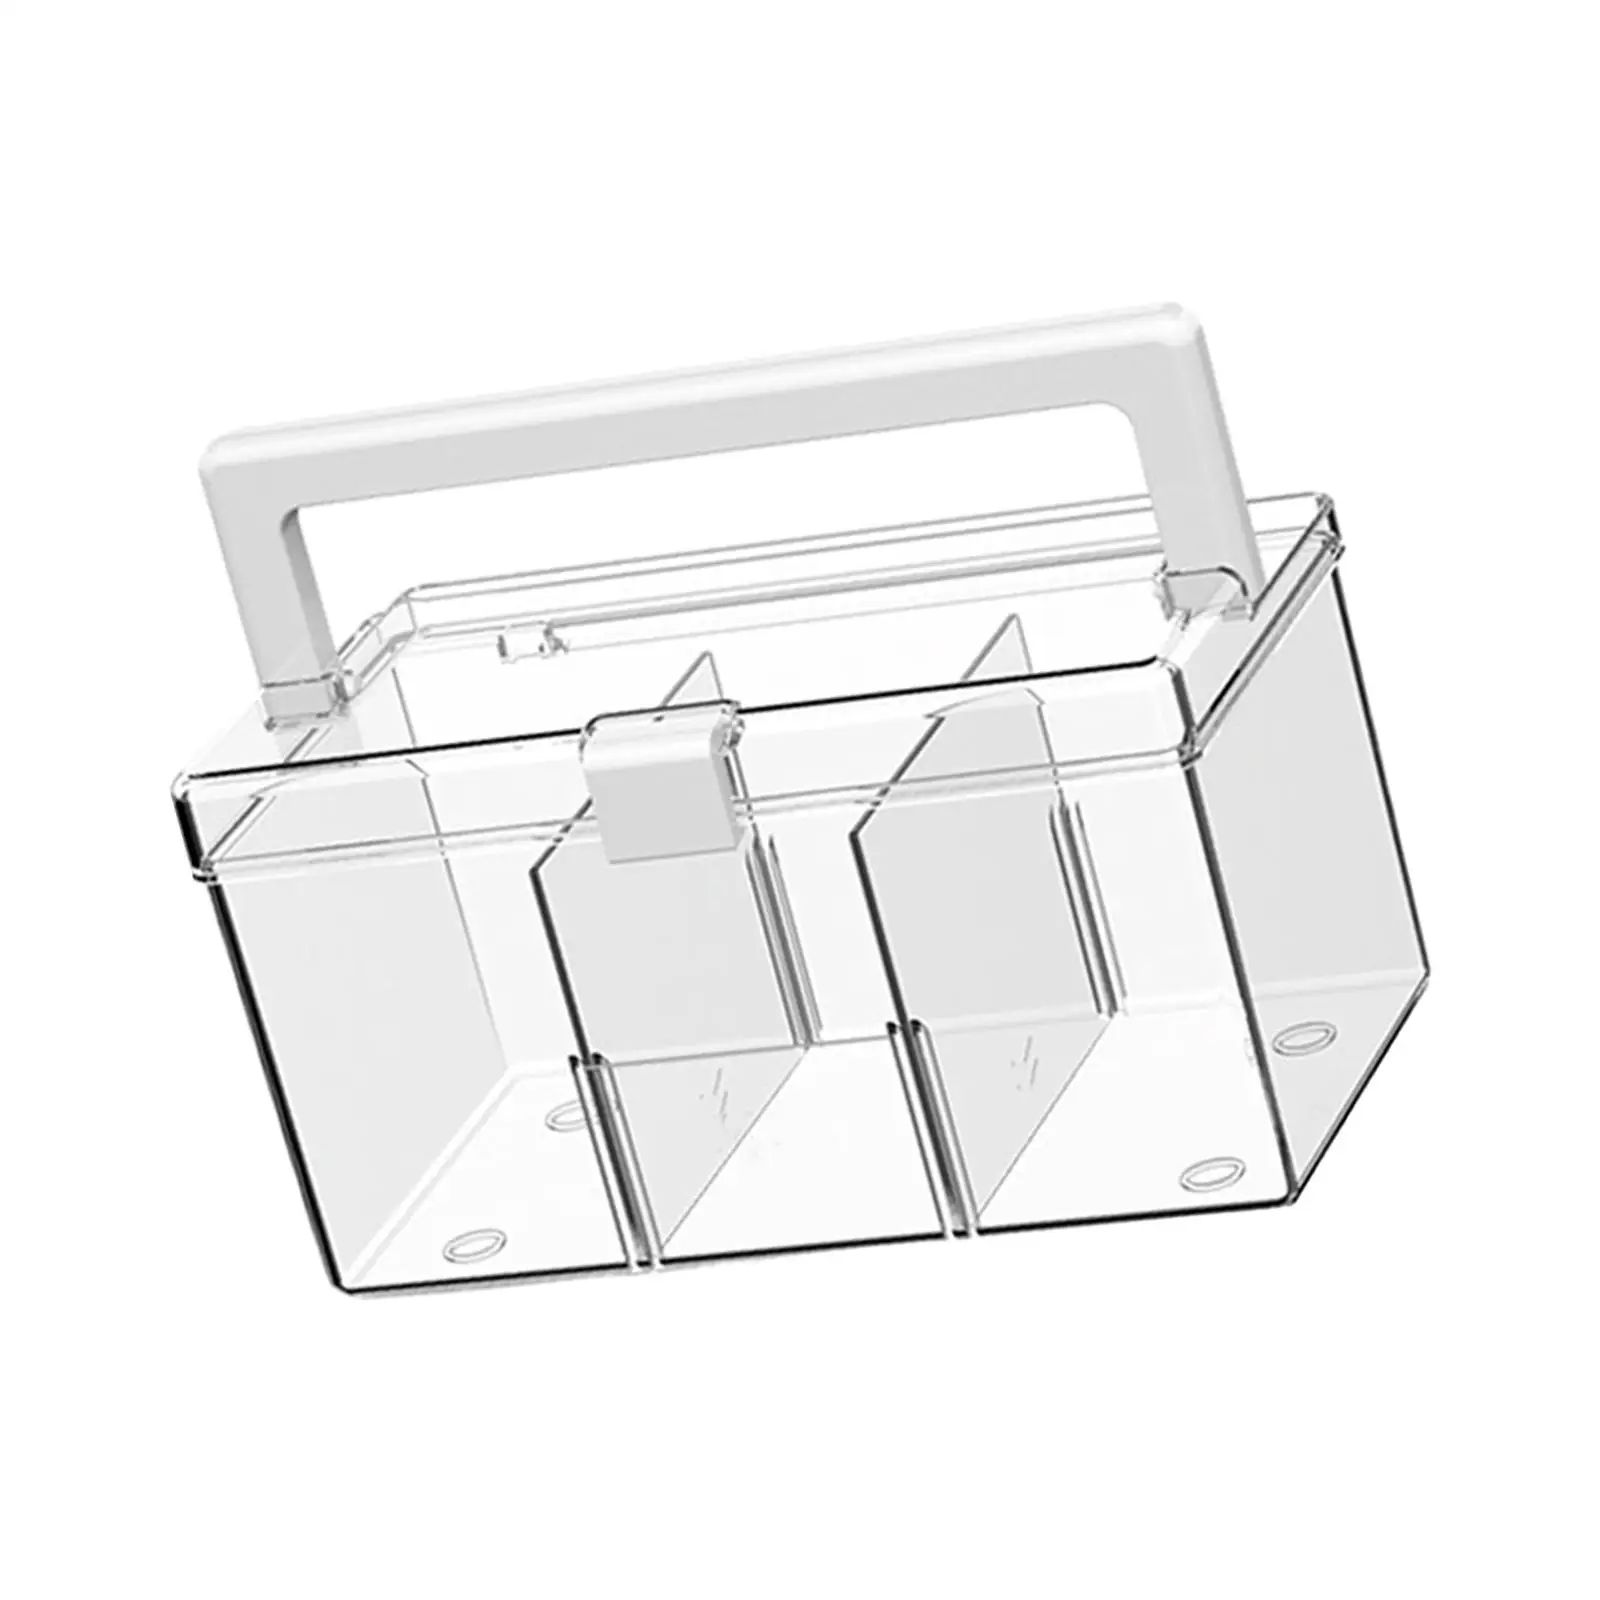 Card Box Water Resistant Versatile Holder Large Clear Case Standard Card Storage Organizer Card Deck Case for Cards Accessories